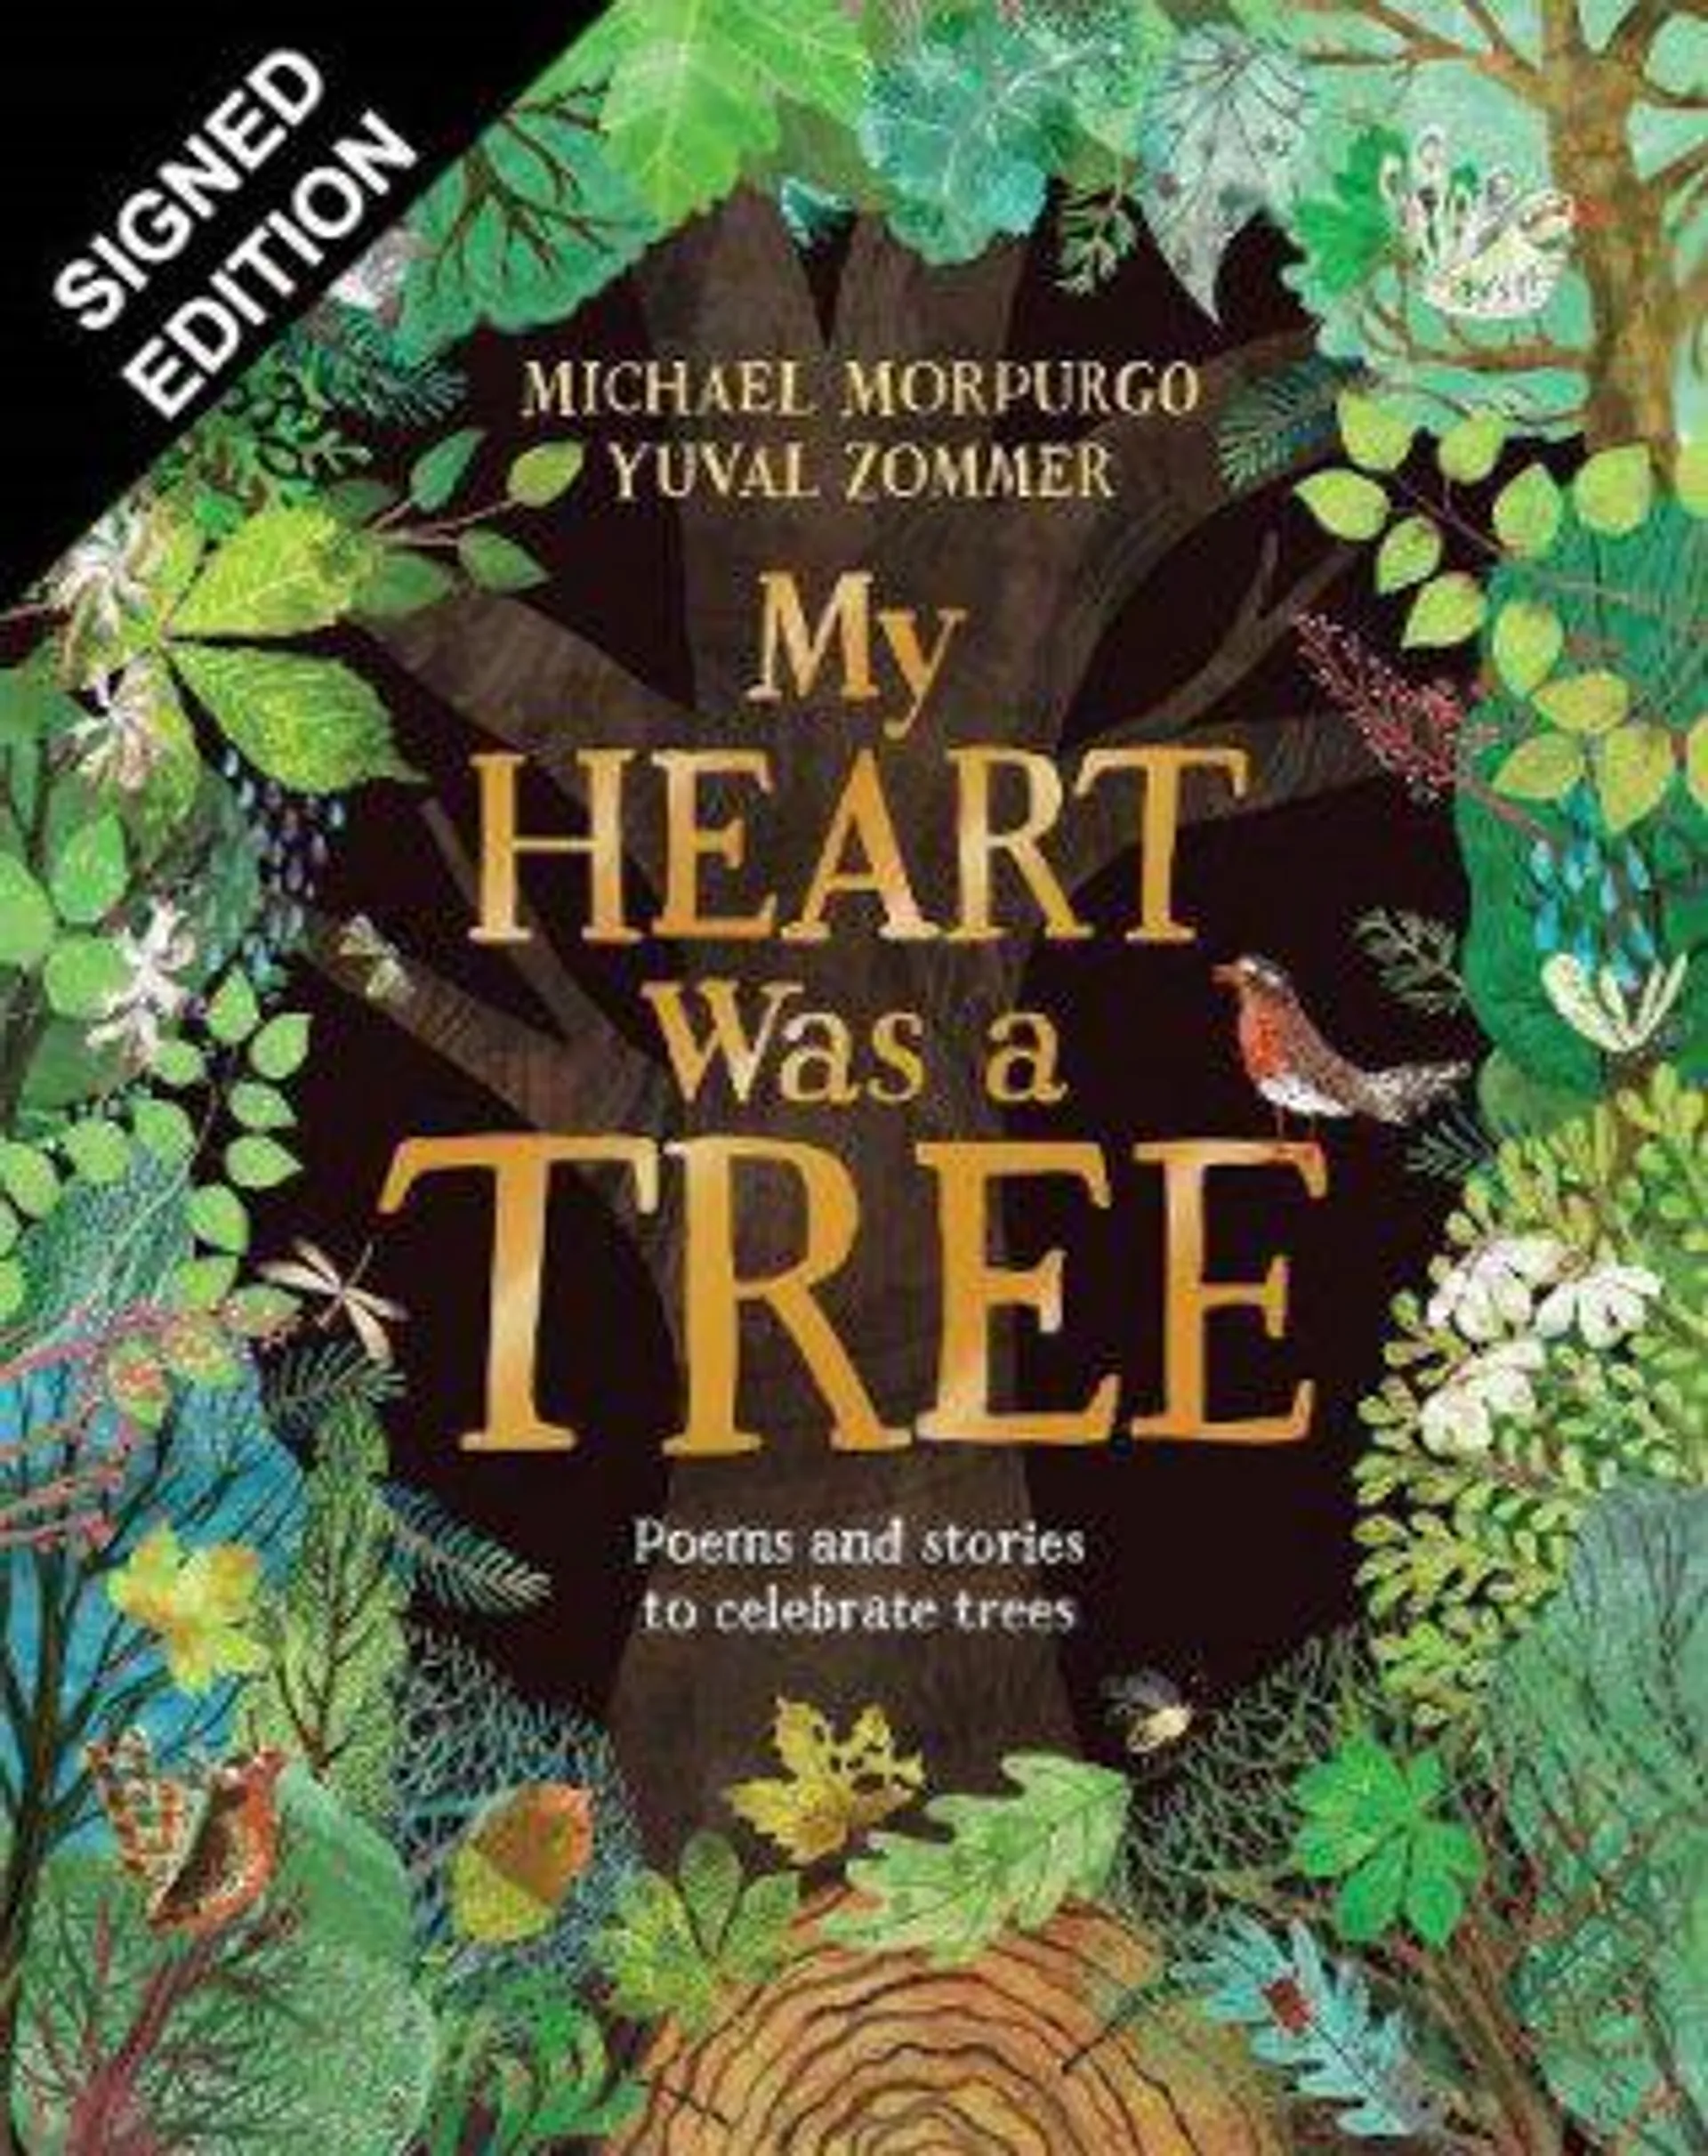 My Heart was a Tree: Poems and stories to celebrate trees: Signed Bookplate Edition (Hardback)